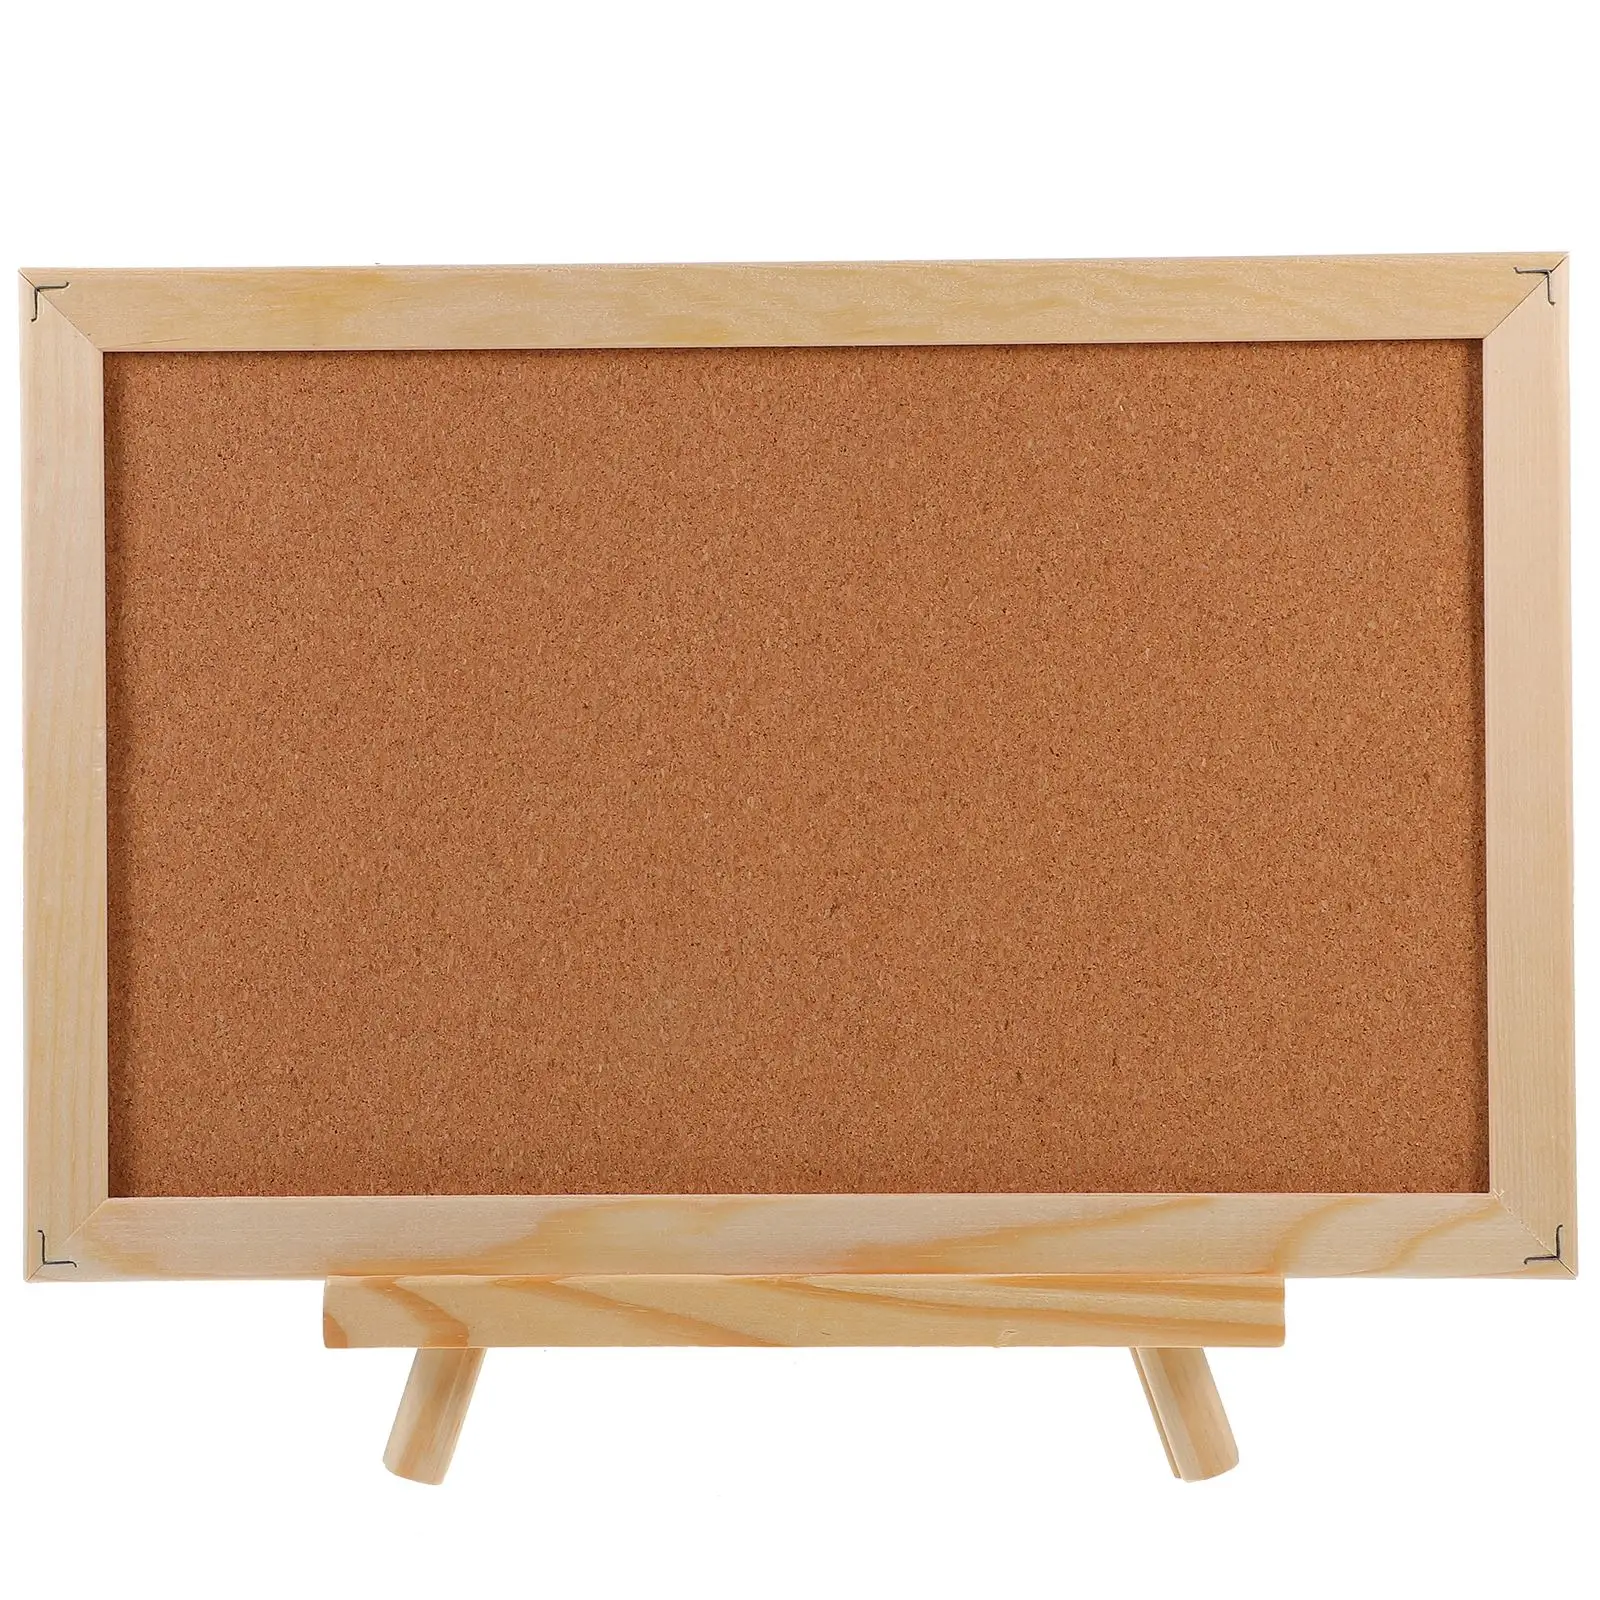 Durable Cork Wood Wall Hanging Message Bulletin Board Frame Notice Note Memo Board For Home Office Shop School Photo Background removable felt cloth message board home school planner schedule photo display wall decoration office file card memo label holder